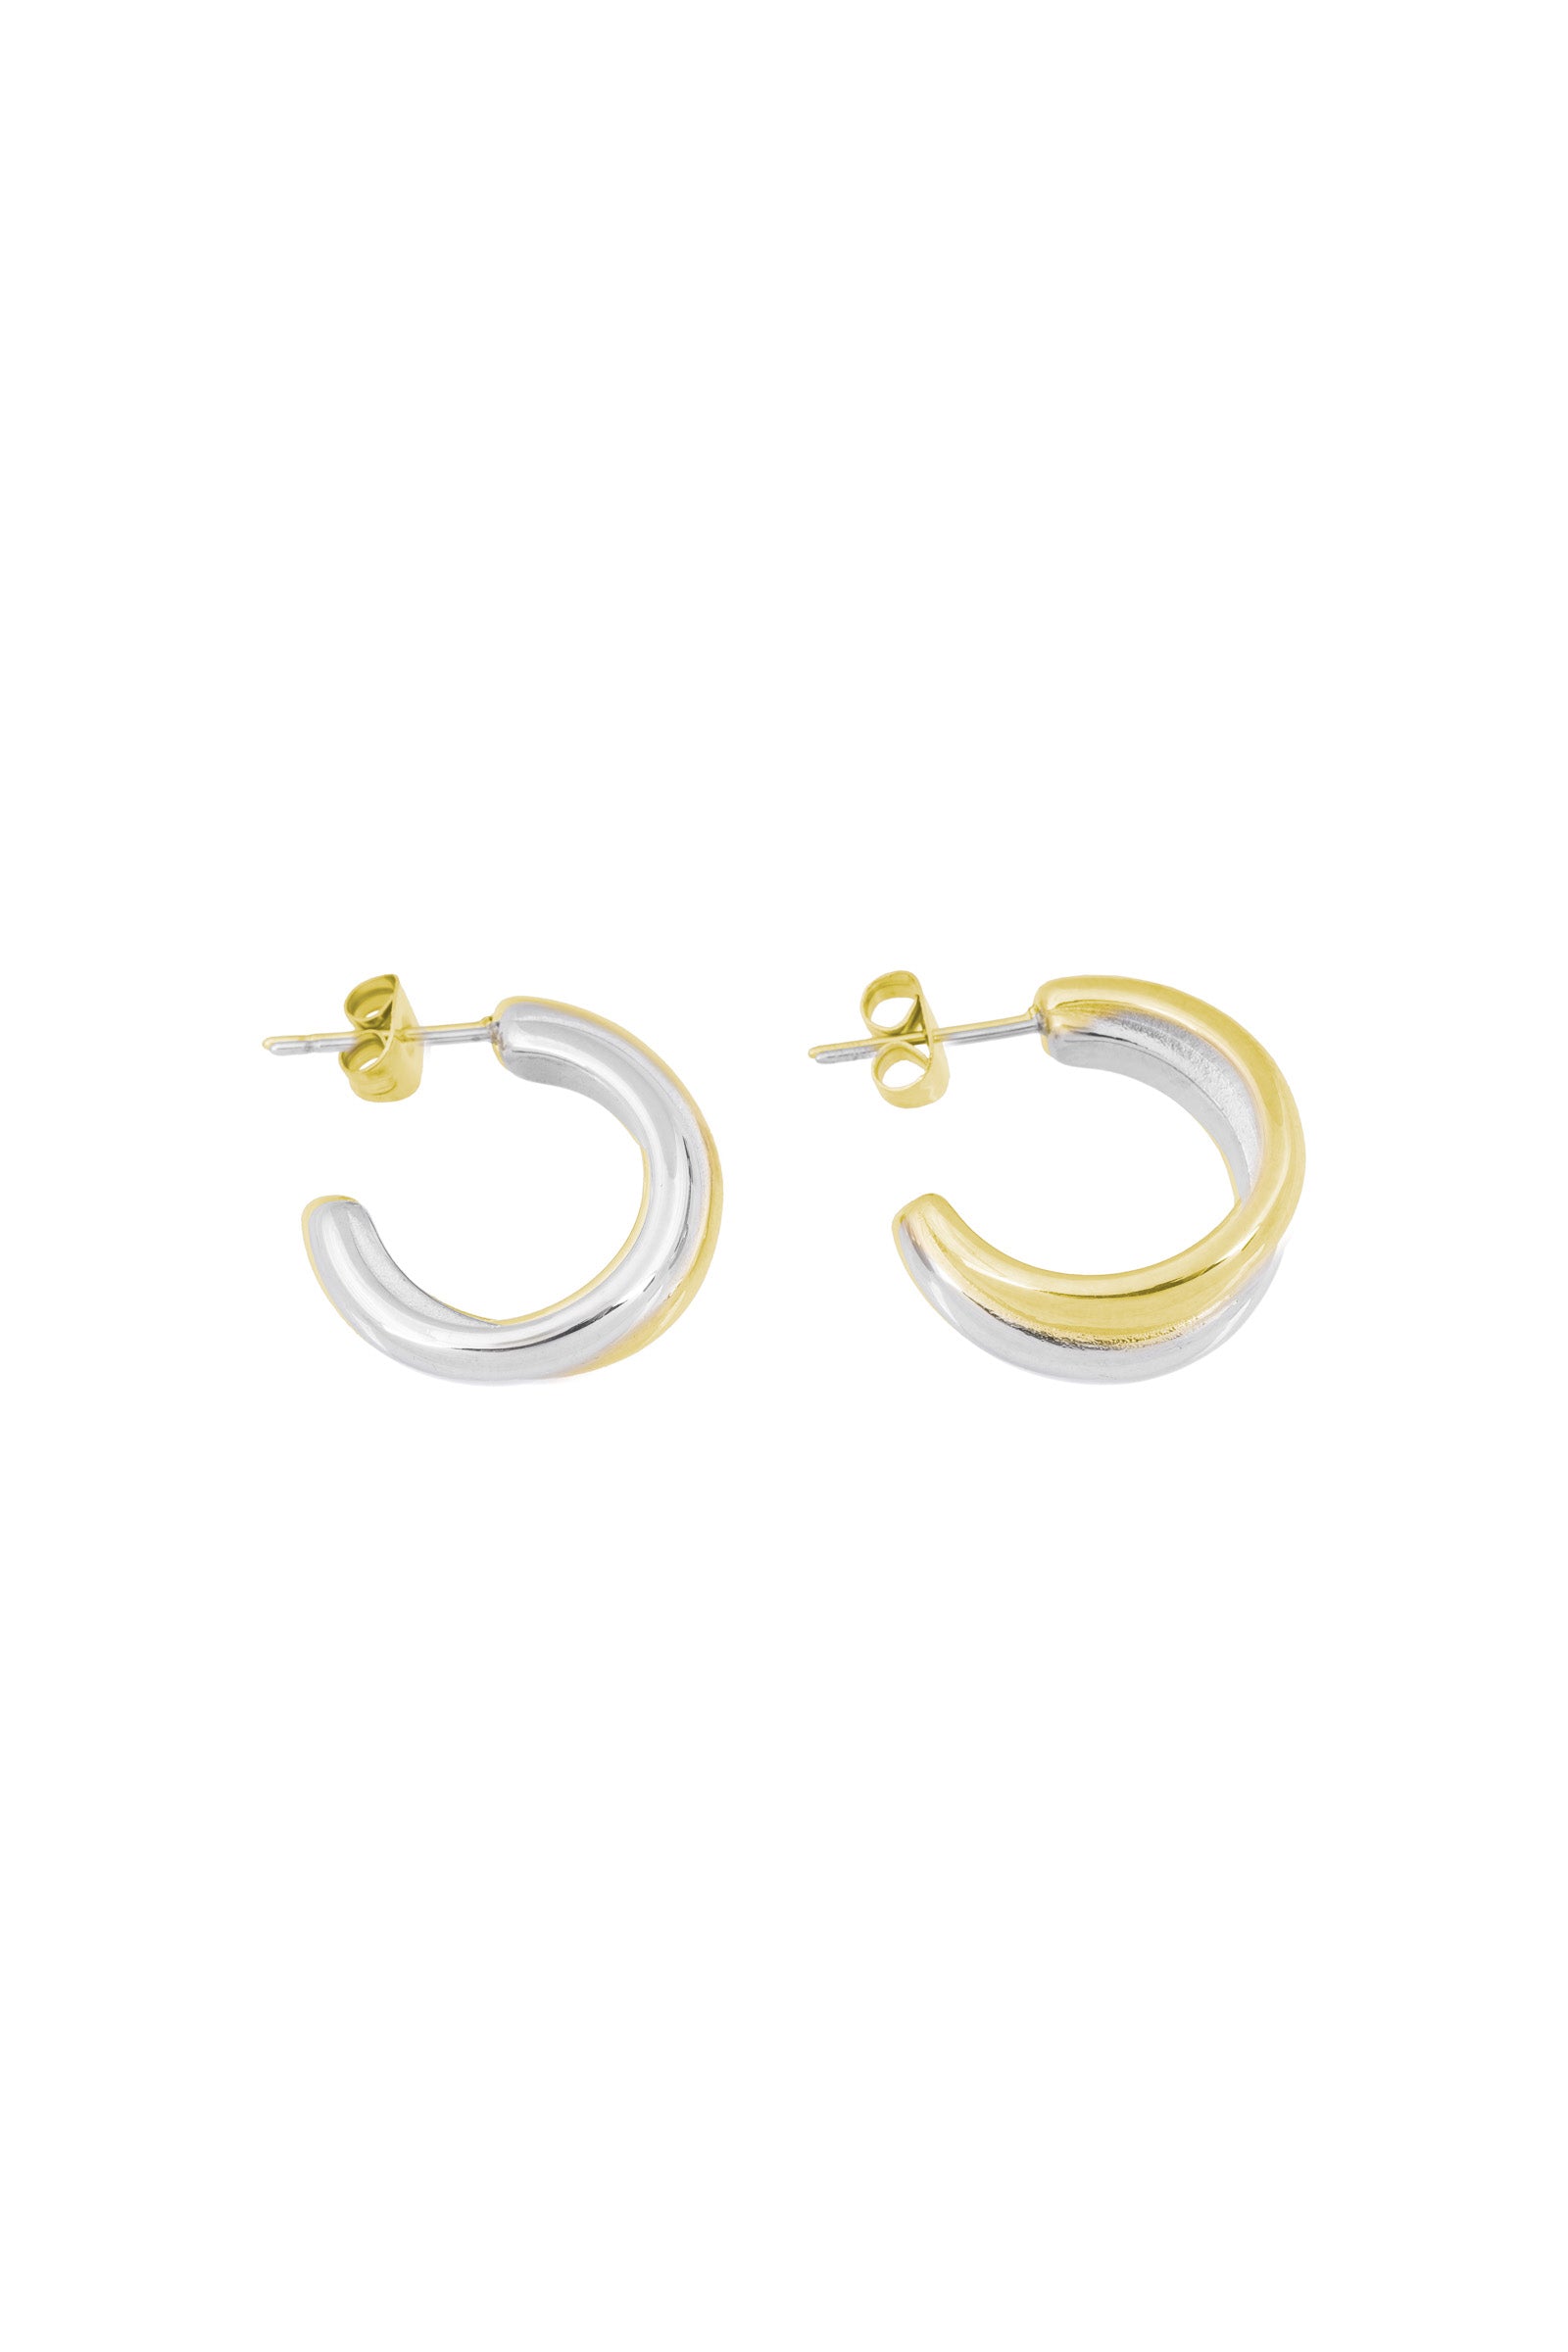 Better Together Earrings - Gold / Silver